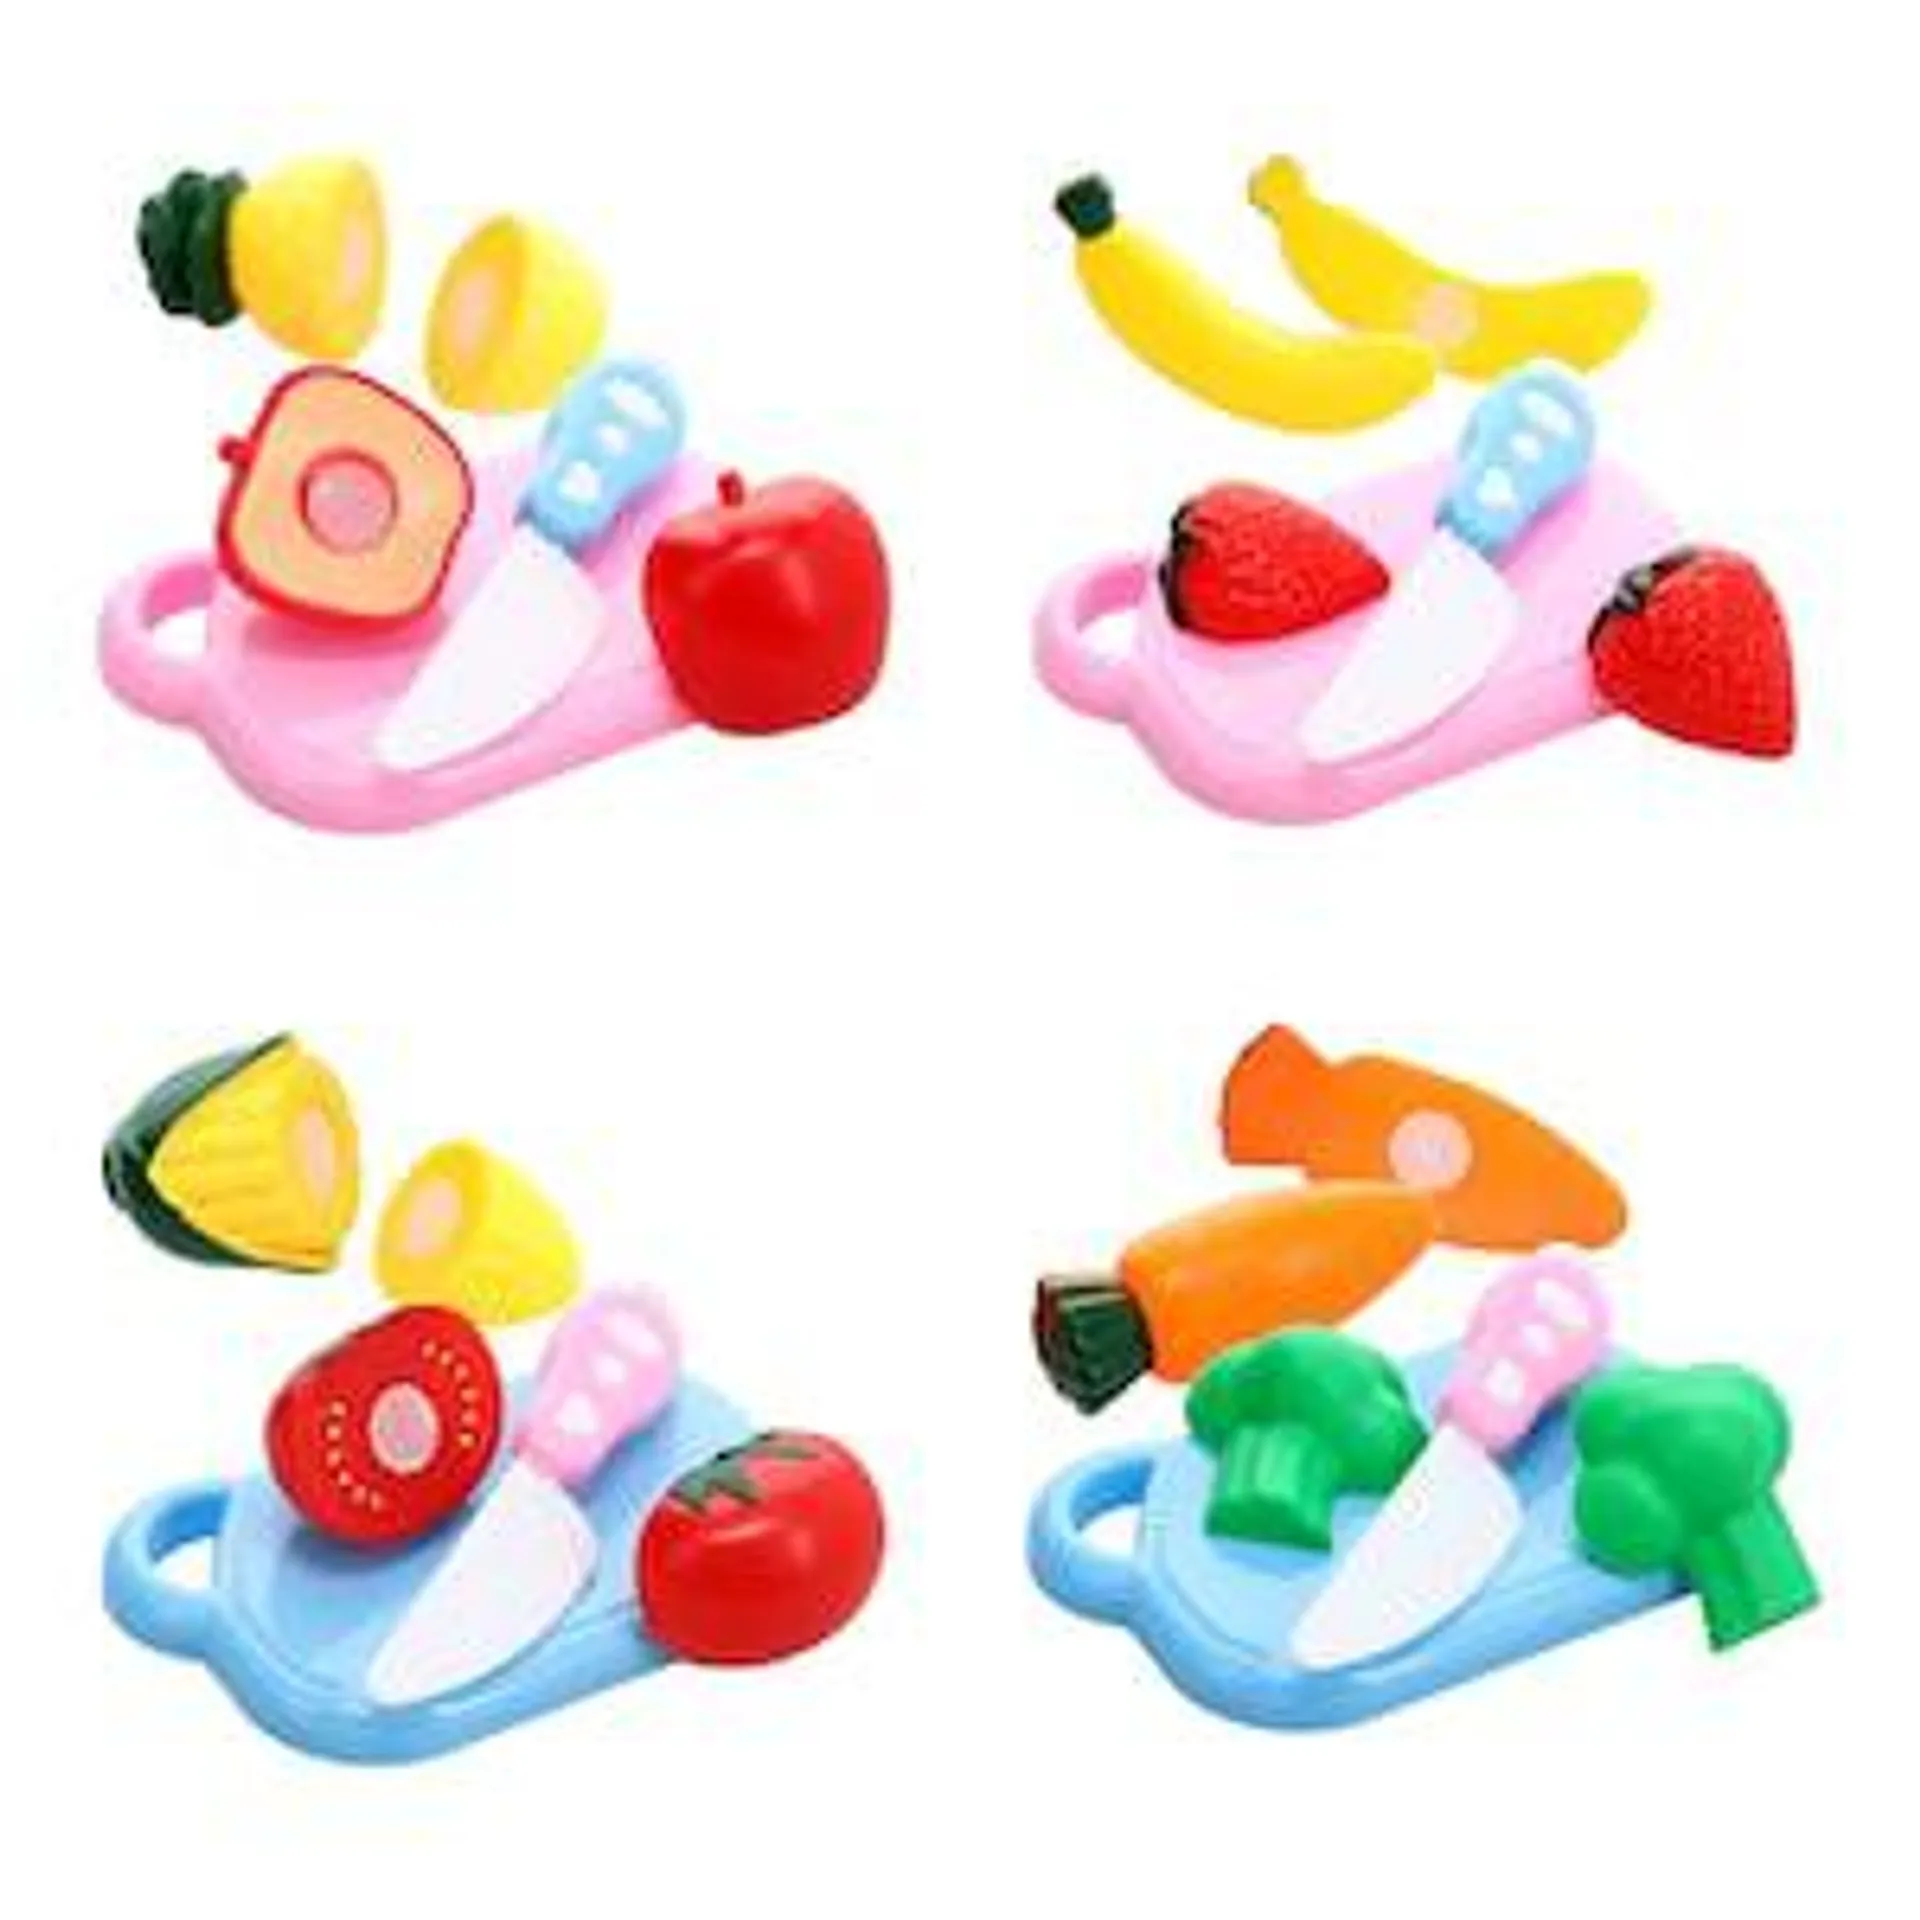 Kitchen Plastic Play Sets of Sliceable Food